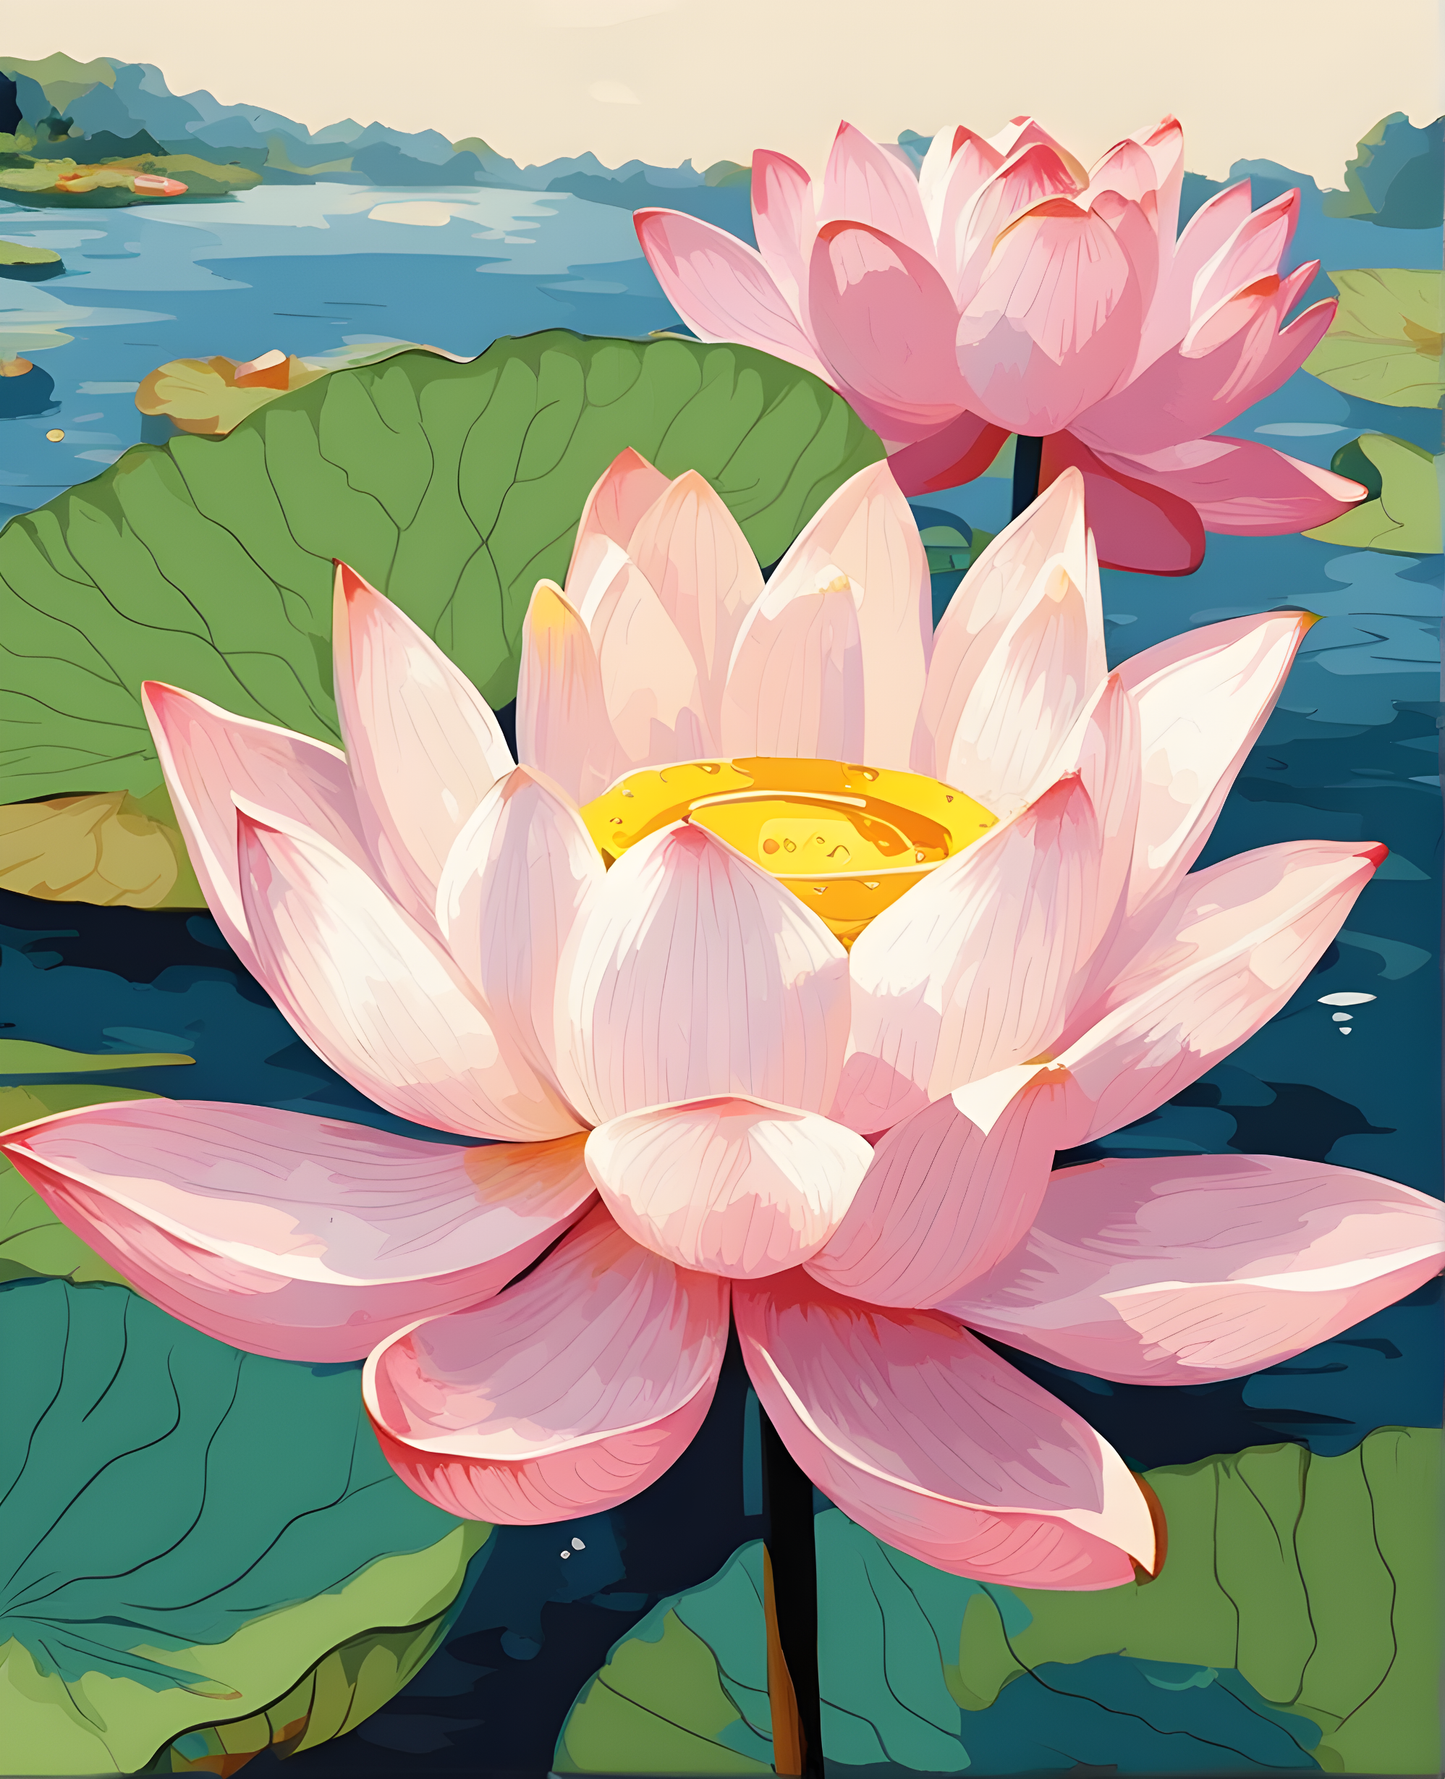 Flowers Collection OD (78) - Lotus - Van-Go Paint-By-Number Kit